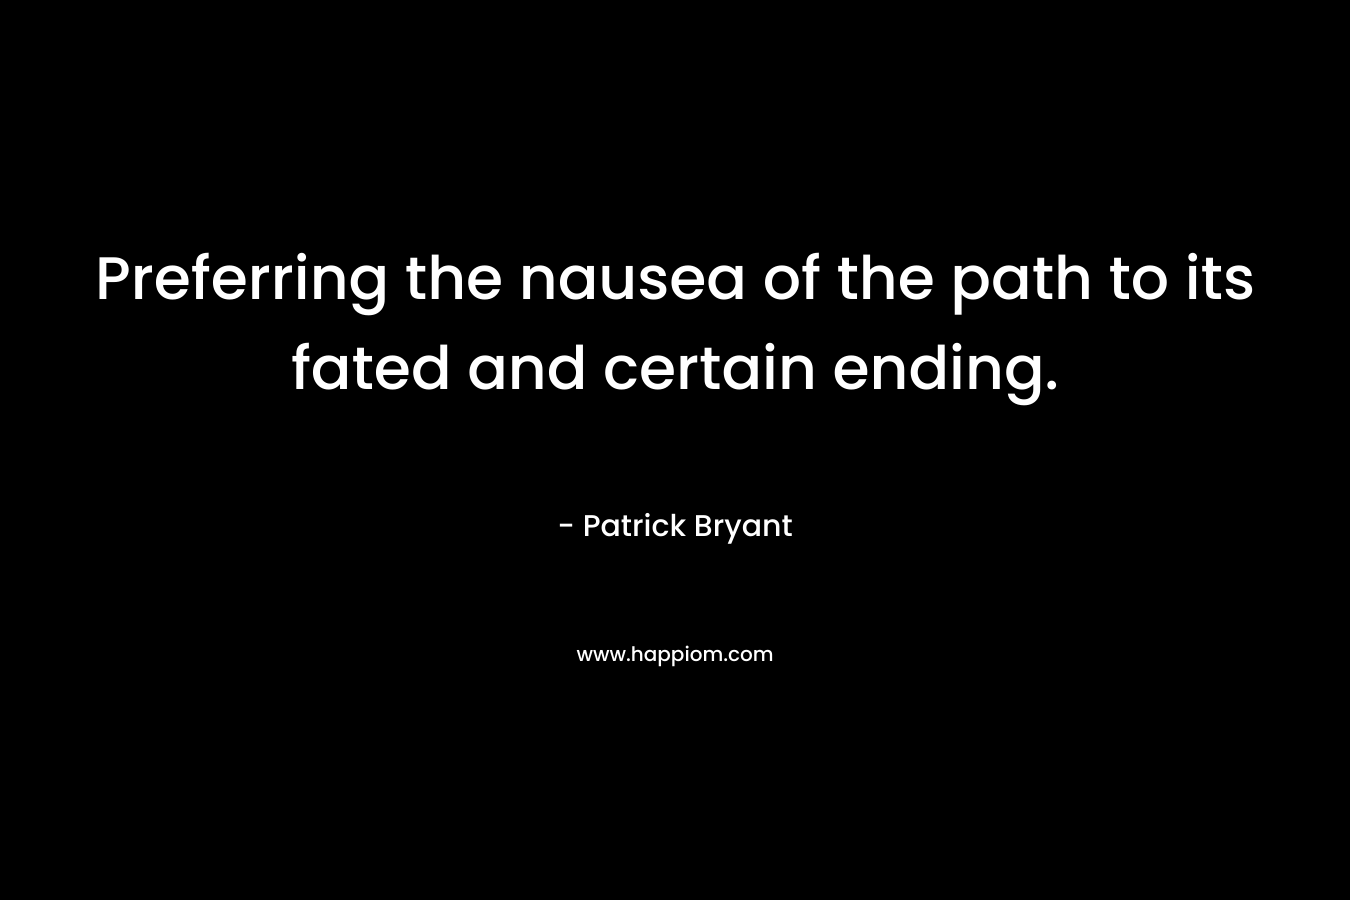 Preferring the nausea of the path to its fated and certain ending. – Patrick Bryant